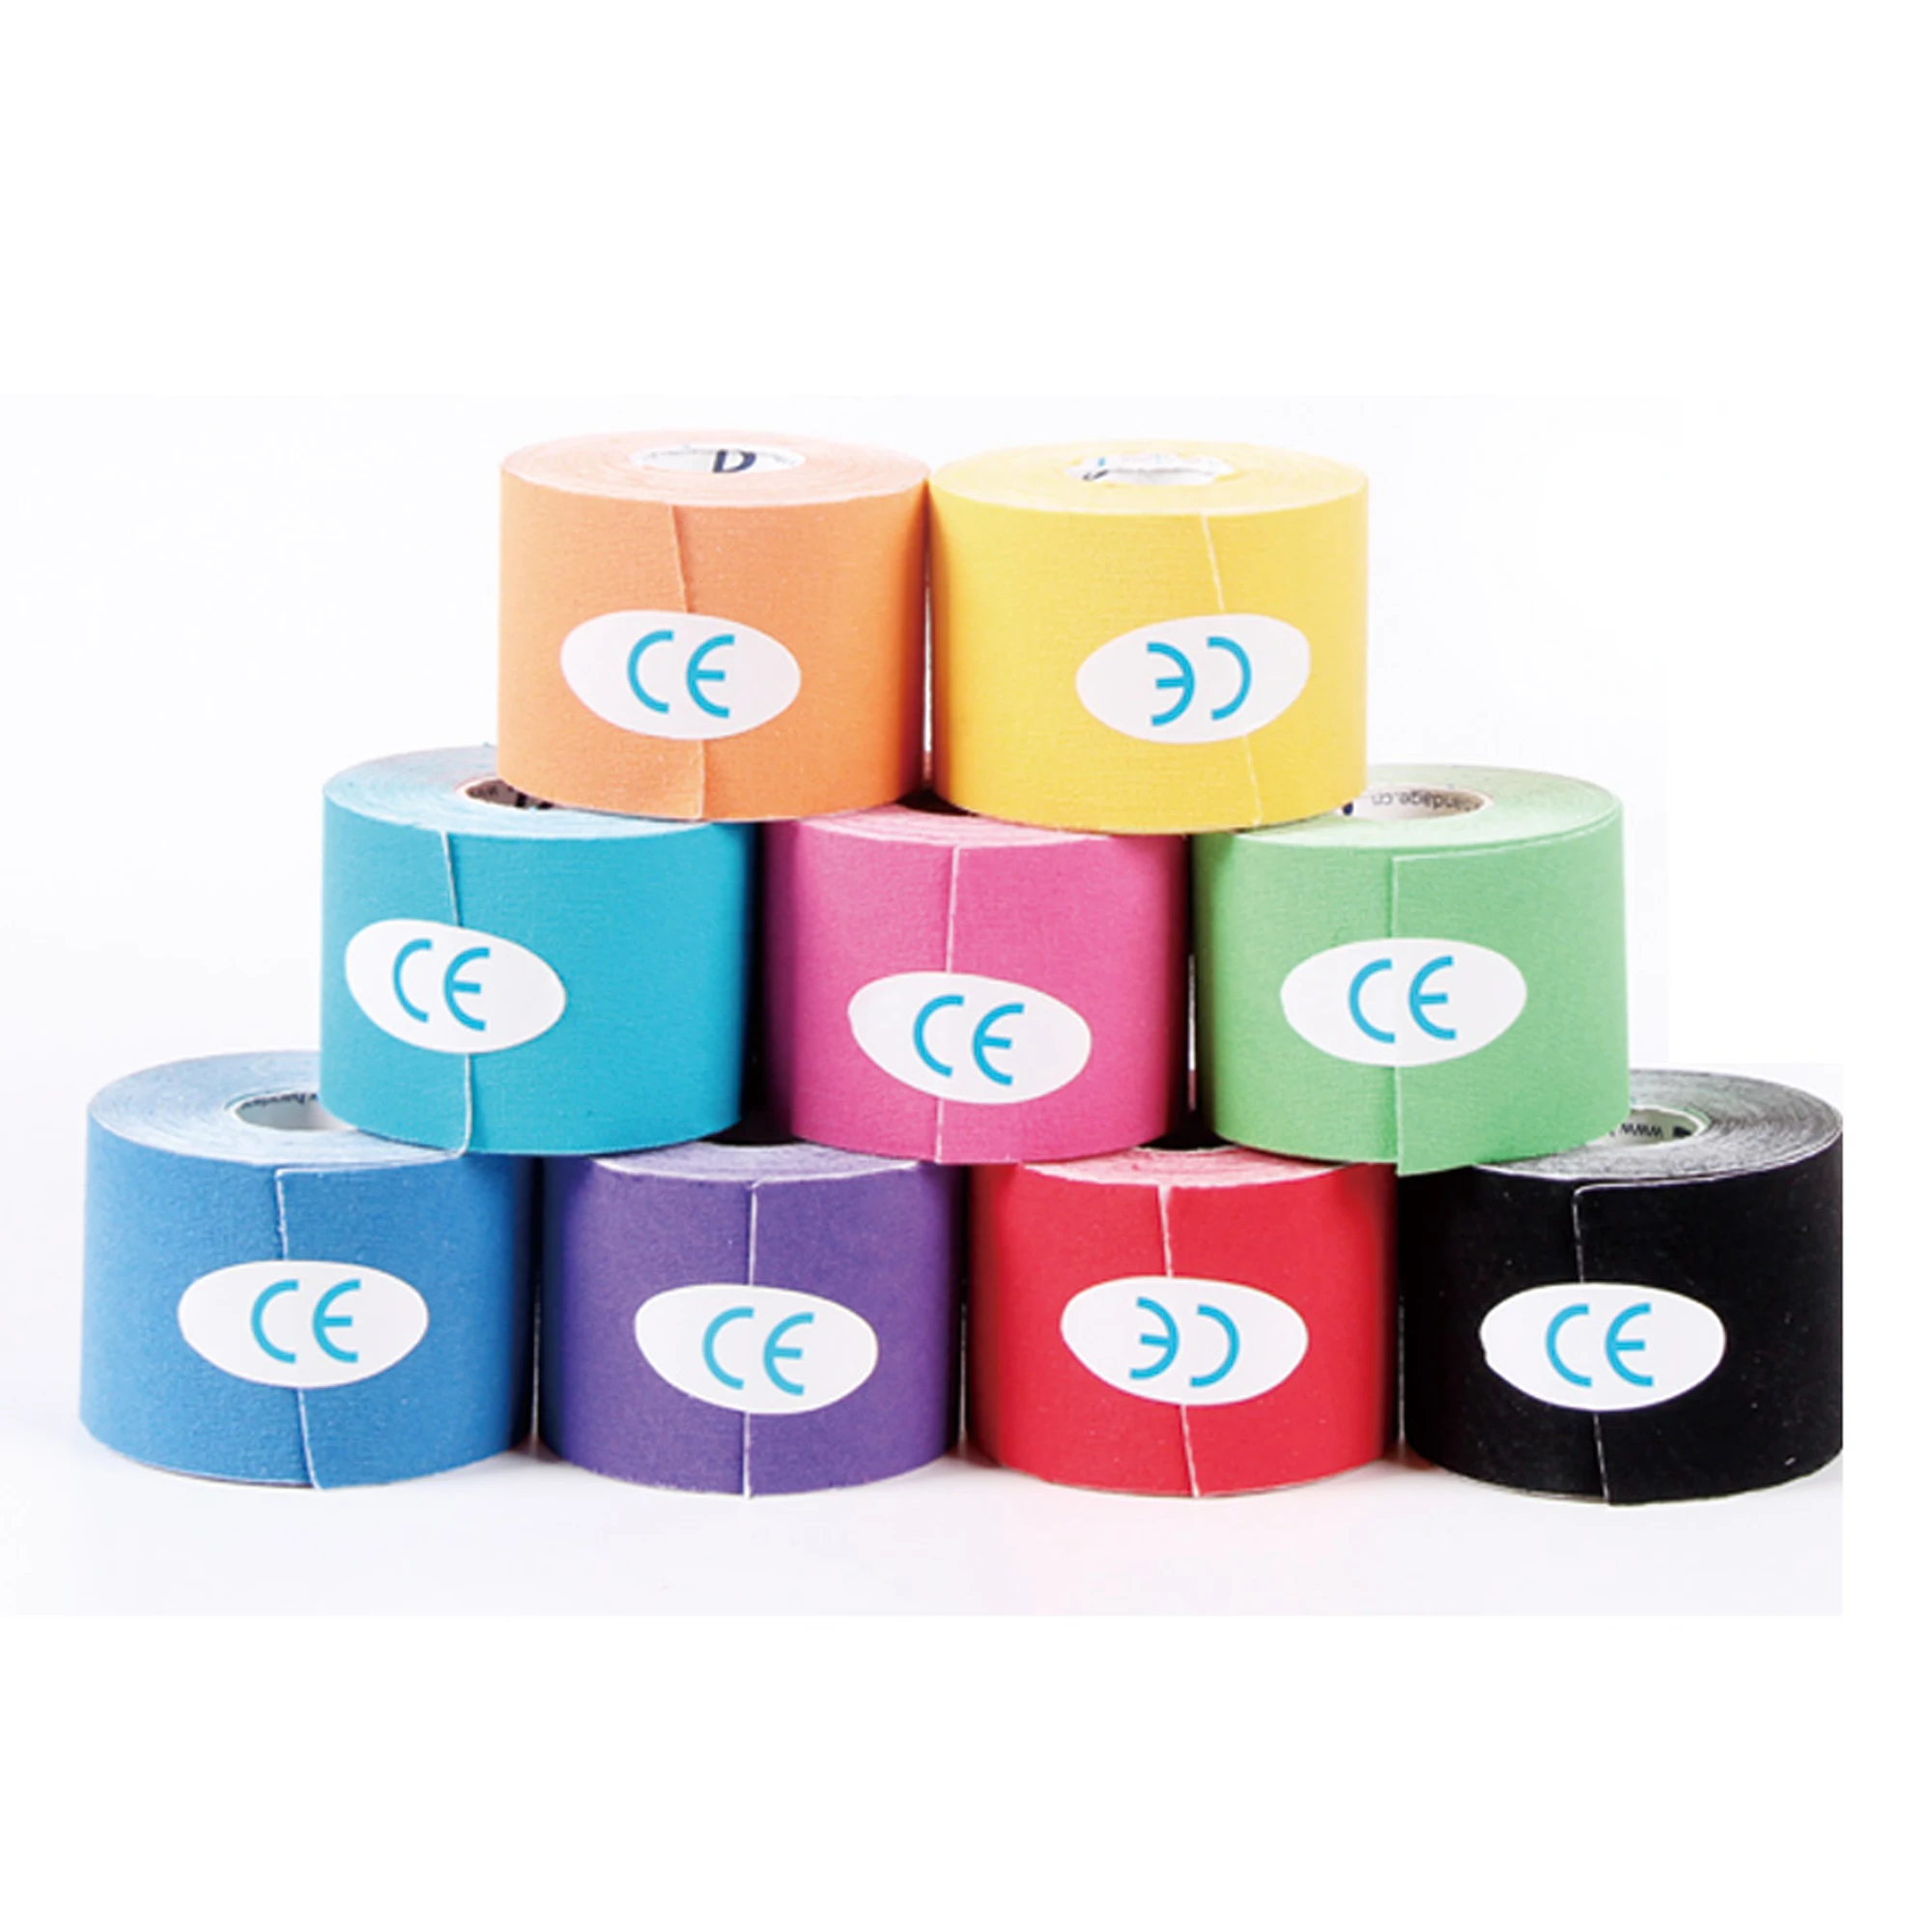 

Kinesiology tape 11 colors 5cm x 5m Sports Kintape Roll Cotton Elastic Adhesive Muscle coloured Bandage Strain Injury Support, 11 colors options (any quantity any color)